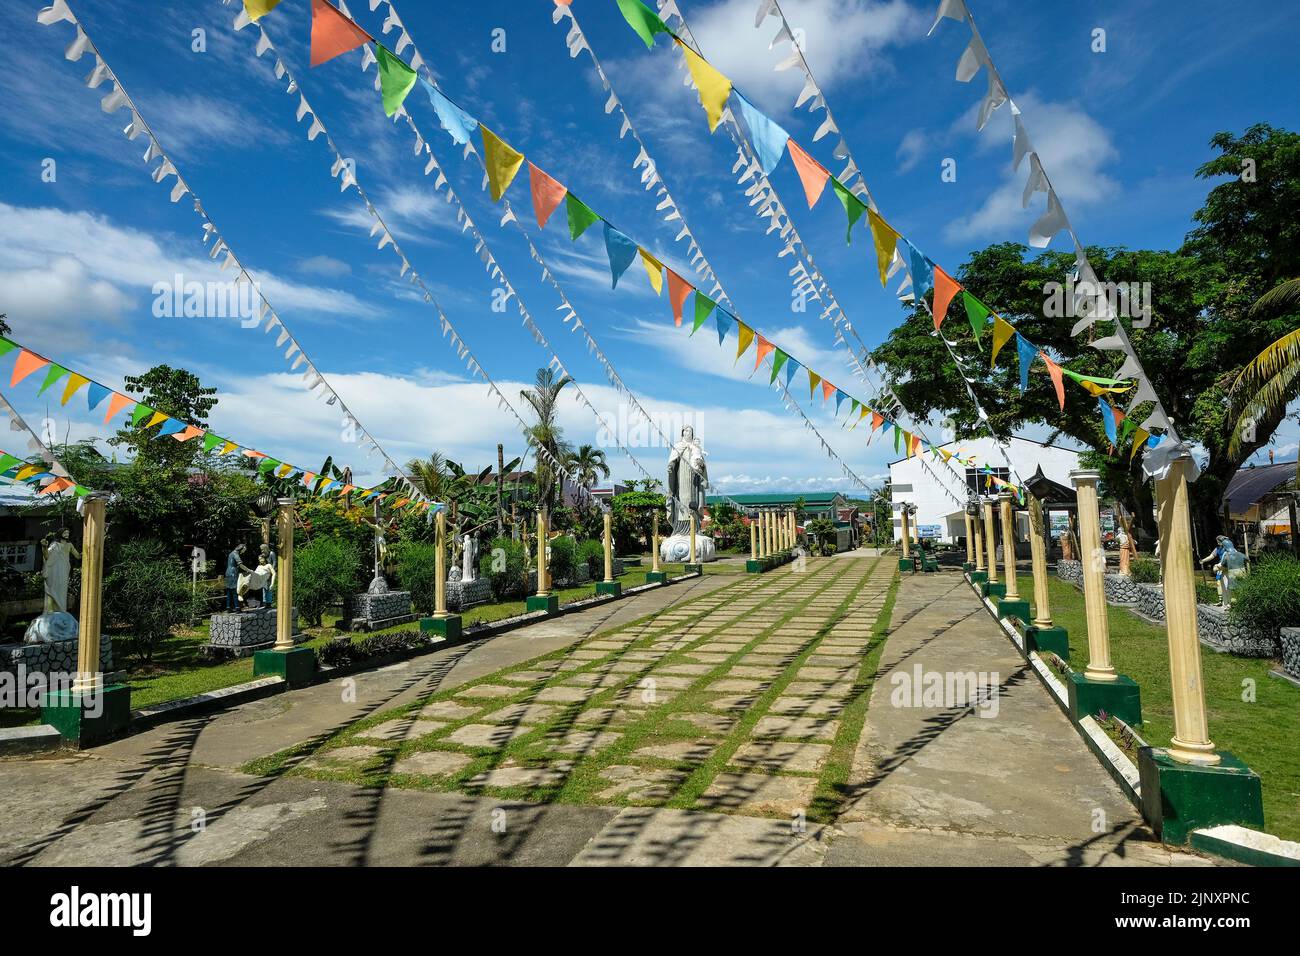 Siargao Island, Philippines - July 2022: Garden of Our Lady of Mount Carmel Parish Church on July 19, 2022 in Del Carmen, Siargao Island, Philippines. Stock Photo